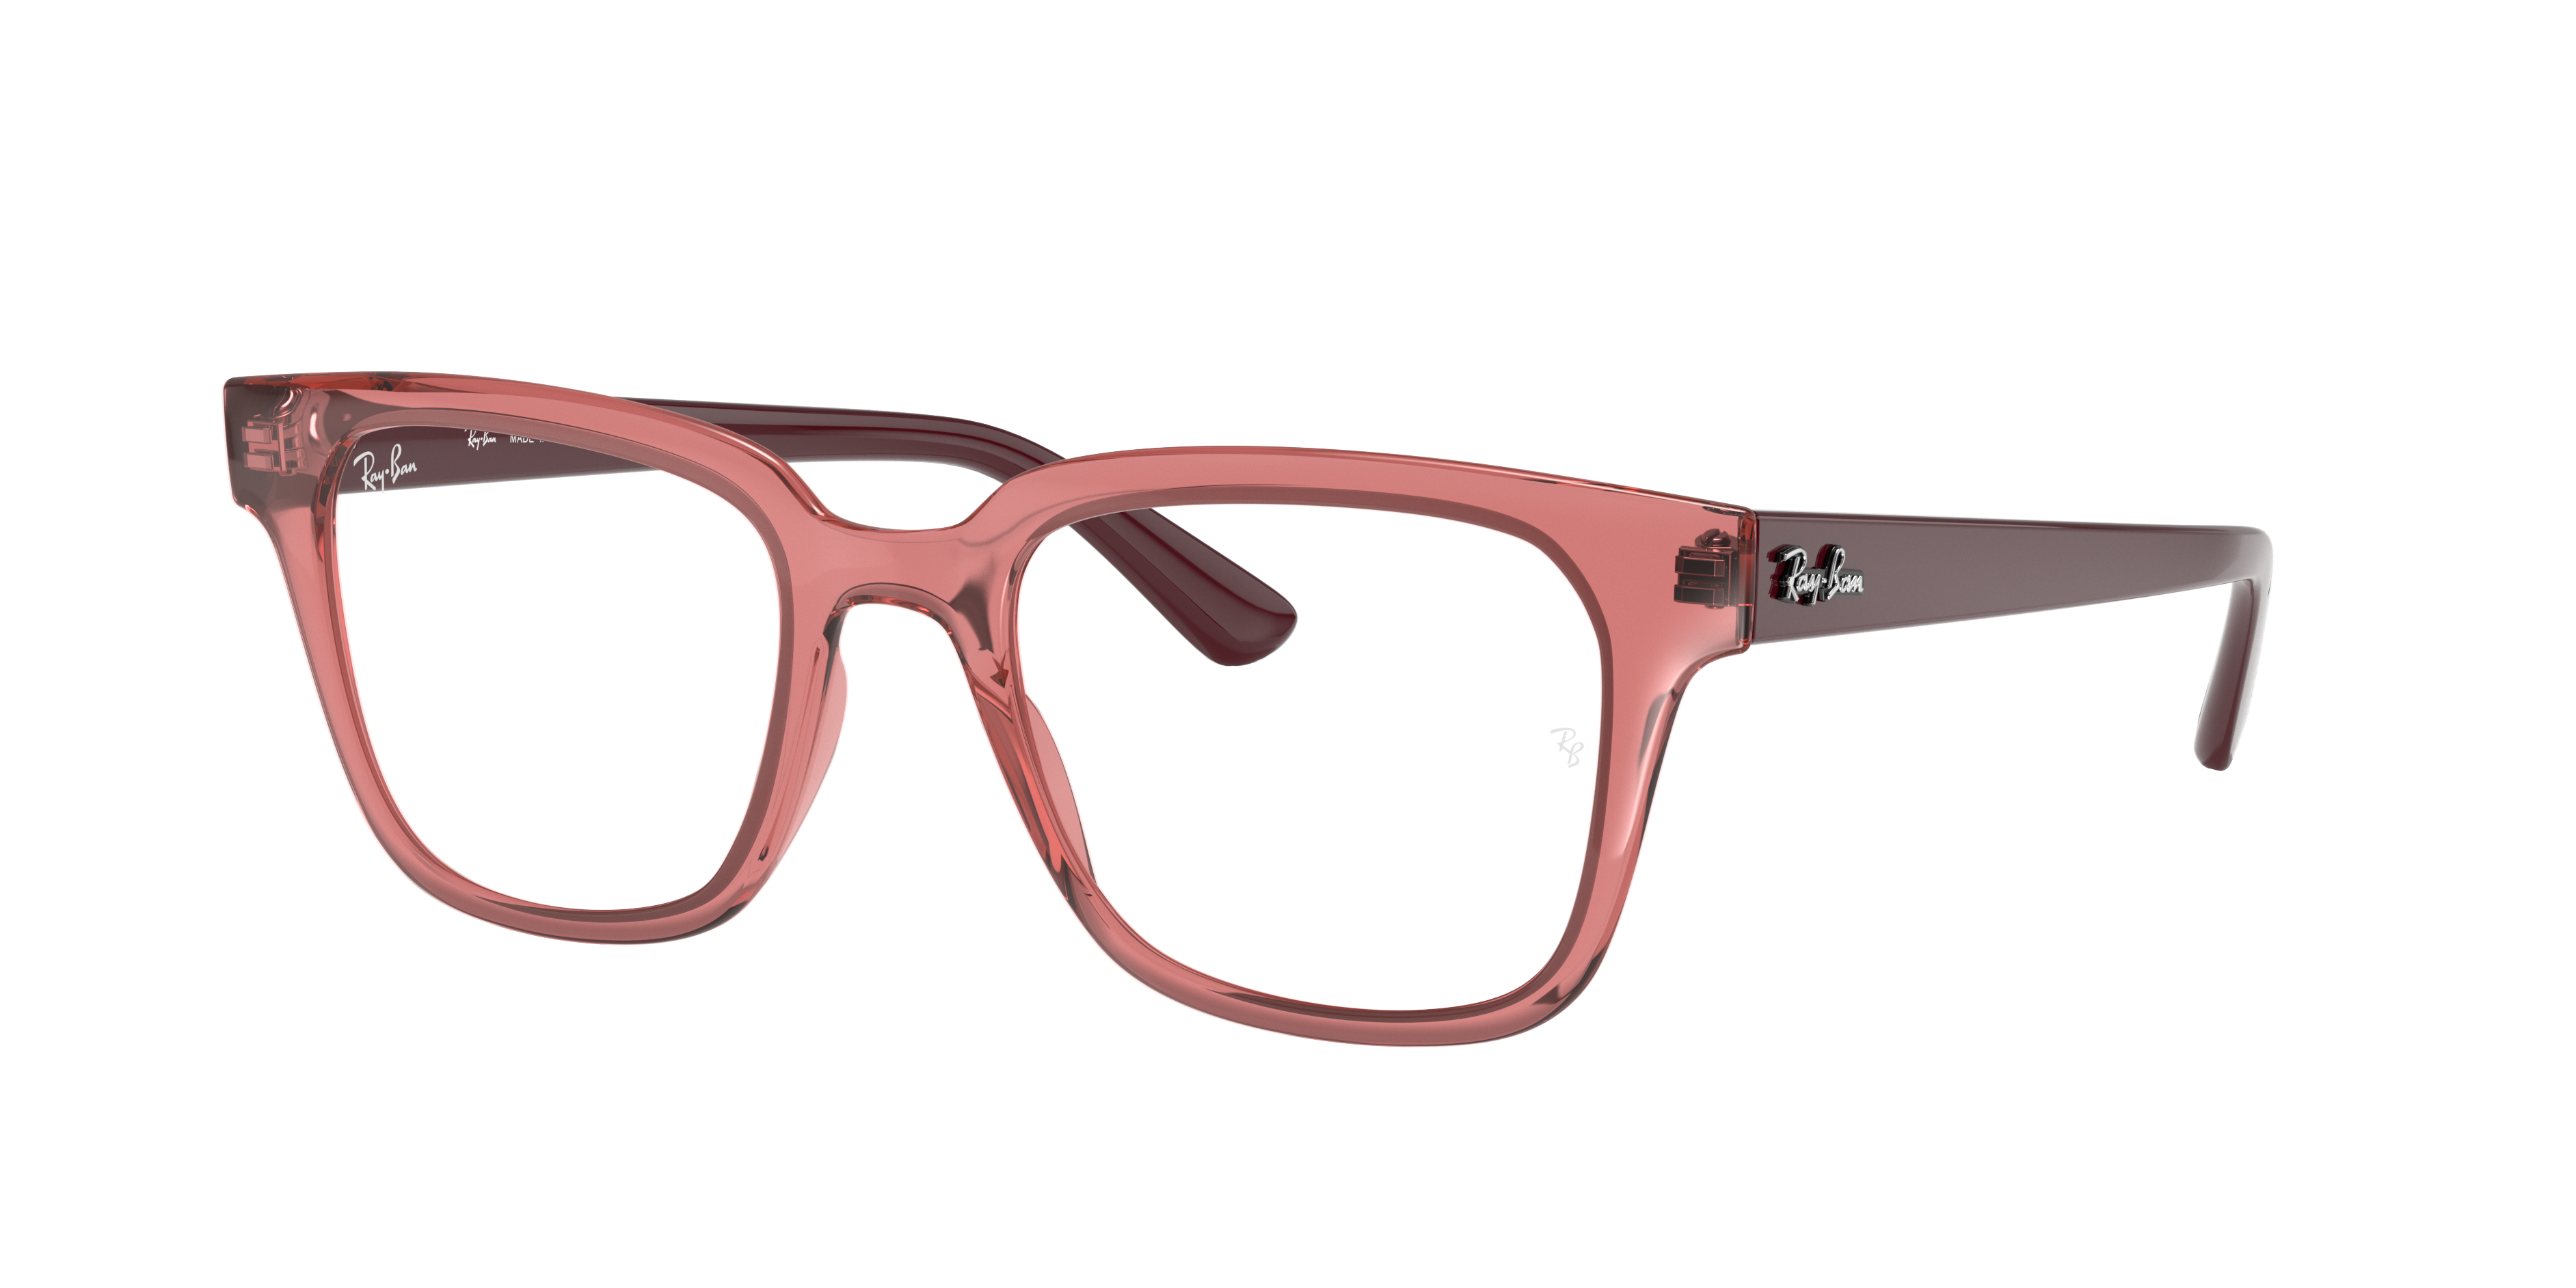 ray ban spectacle frames